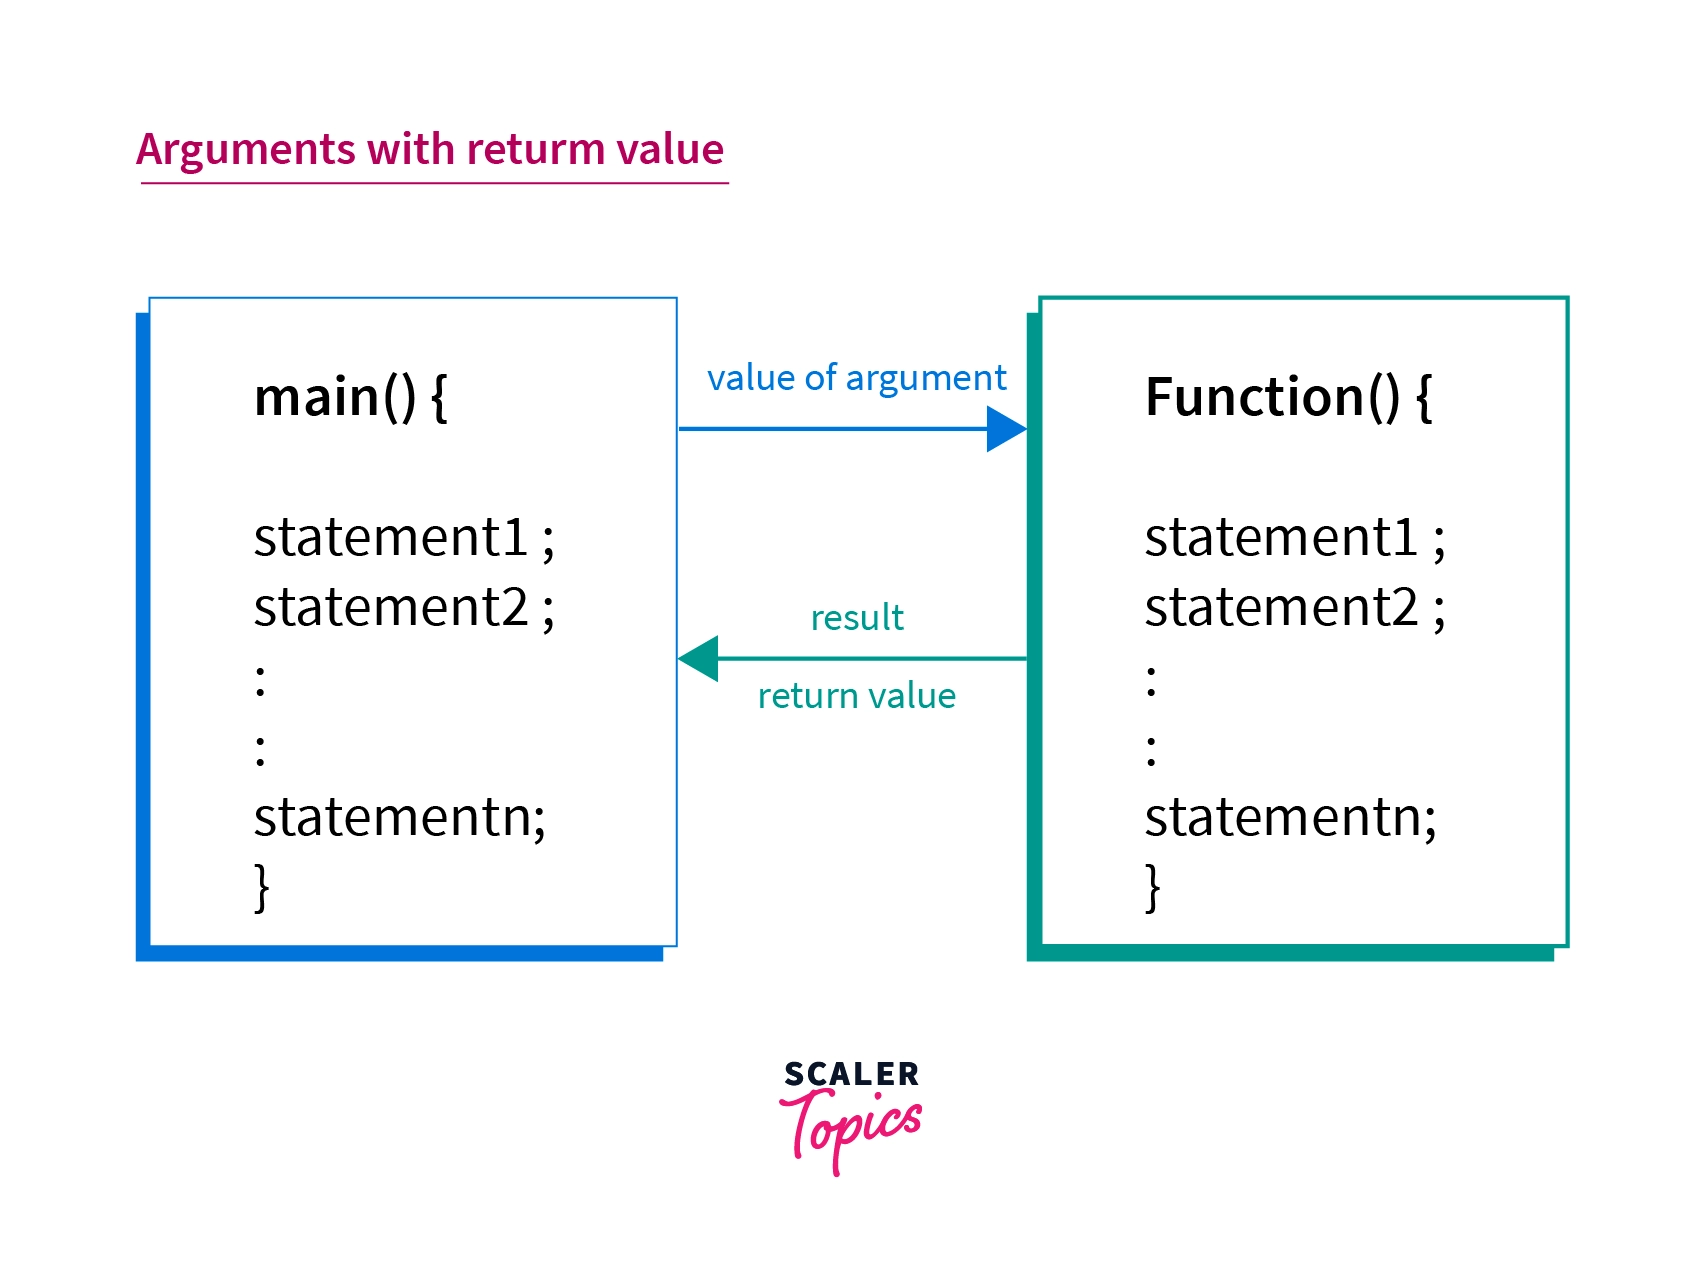 Arguments with Return Value